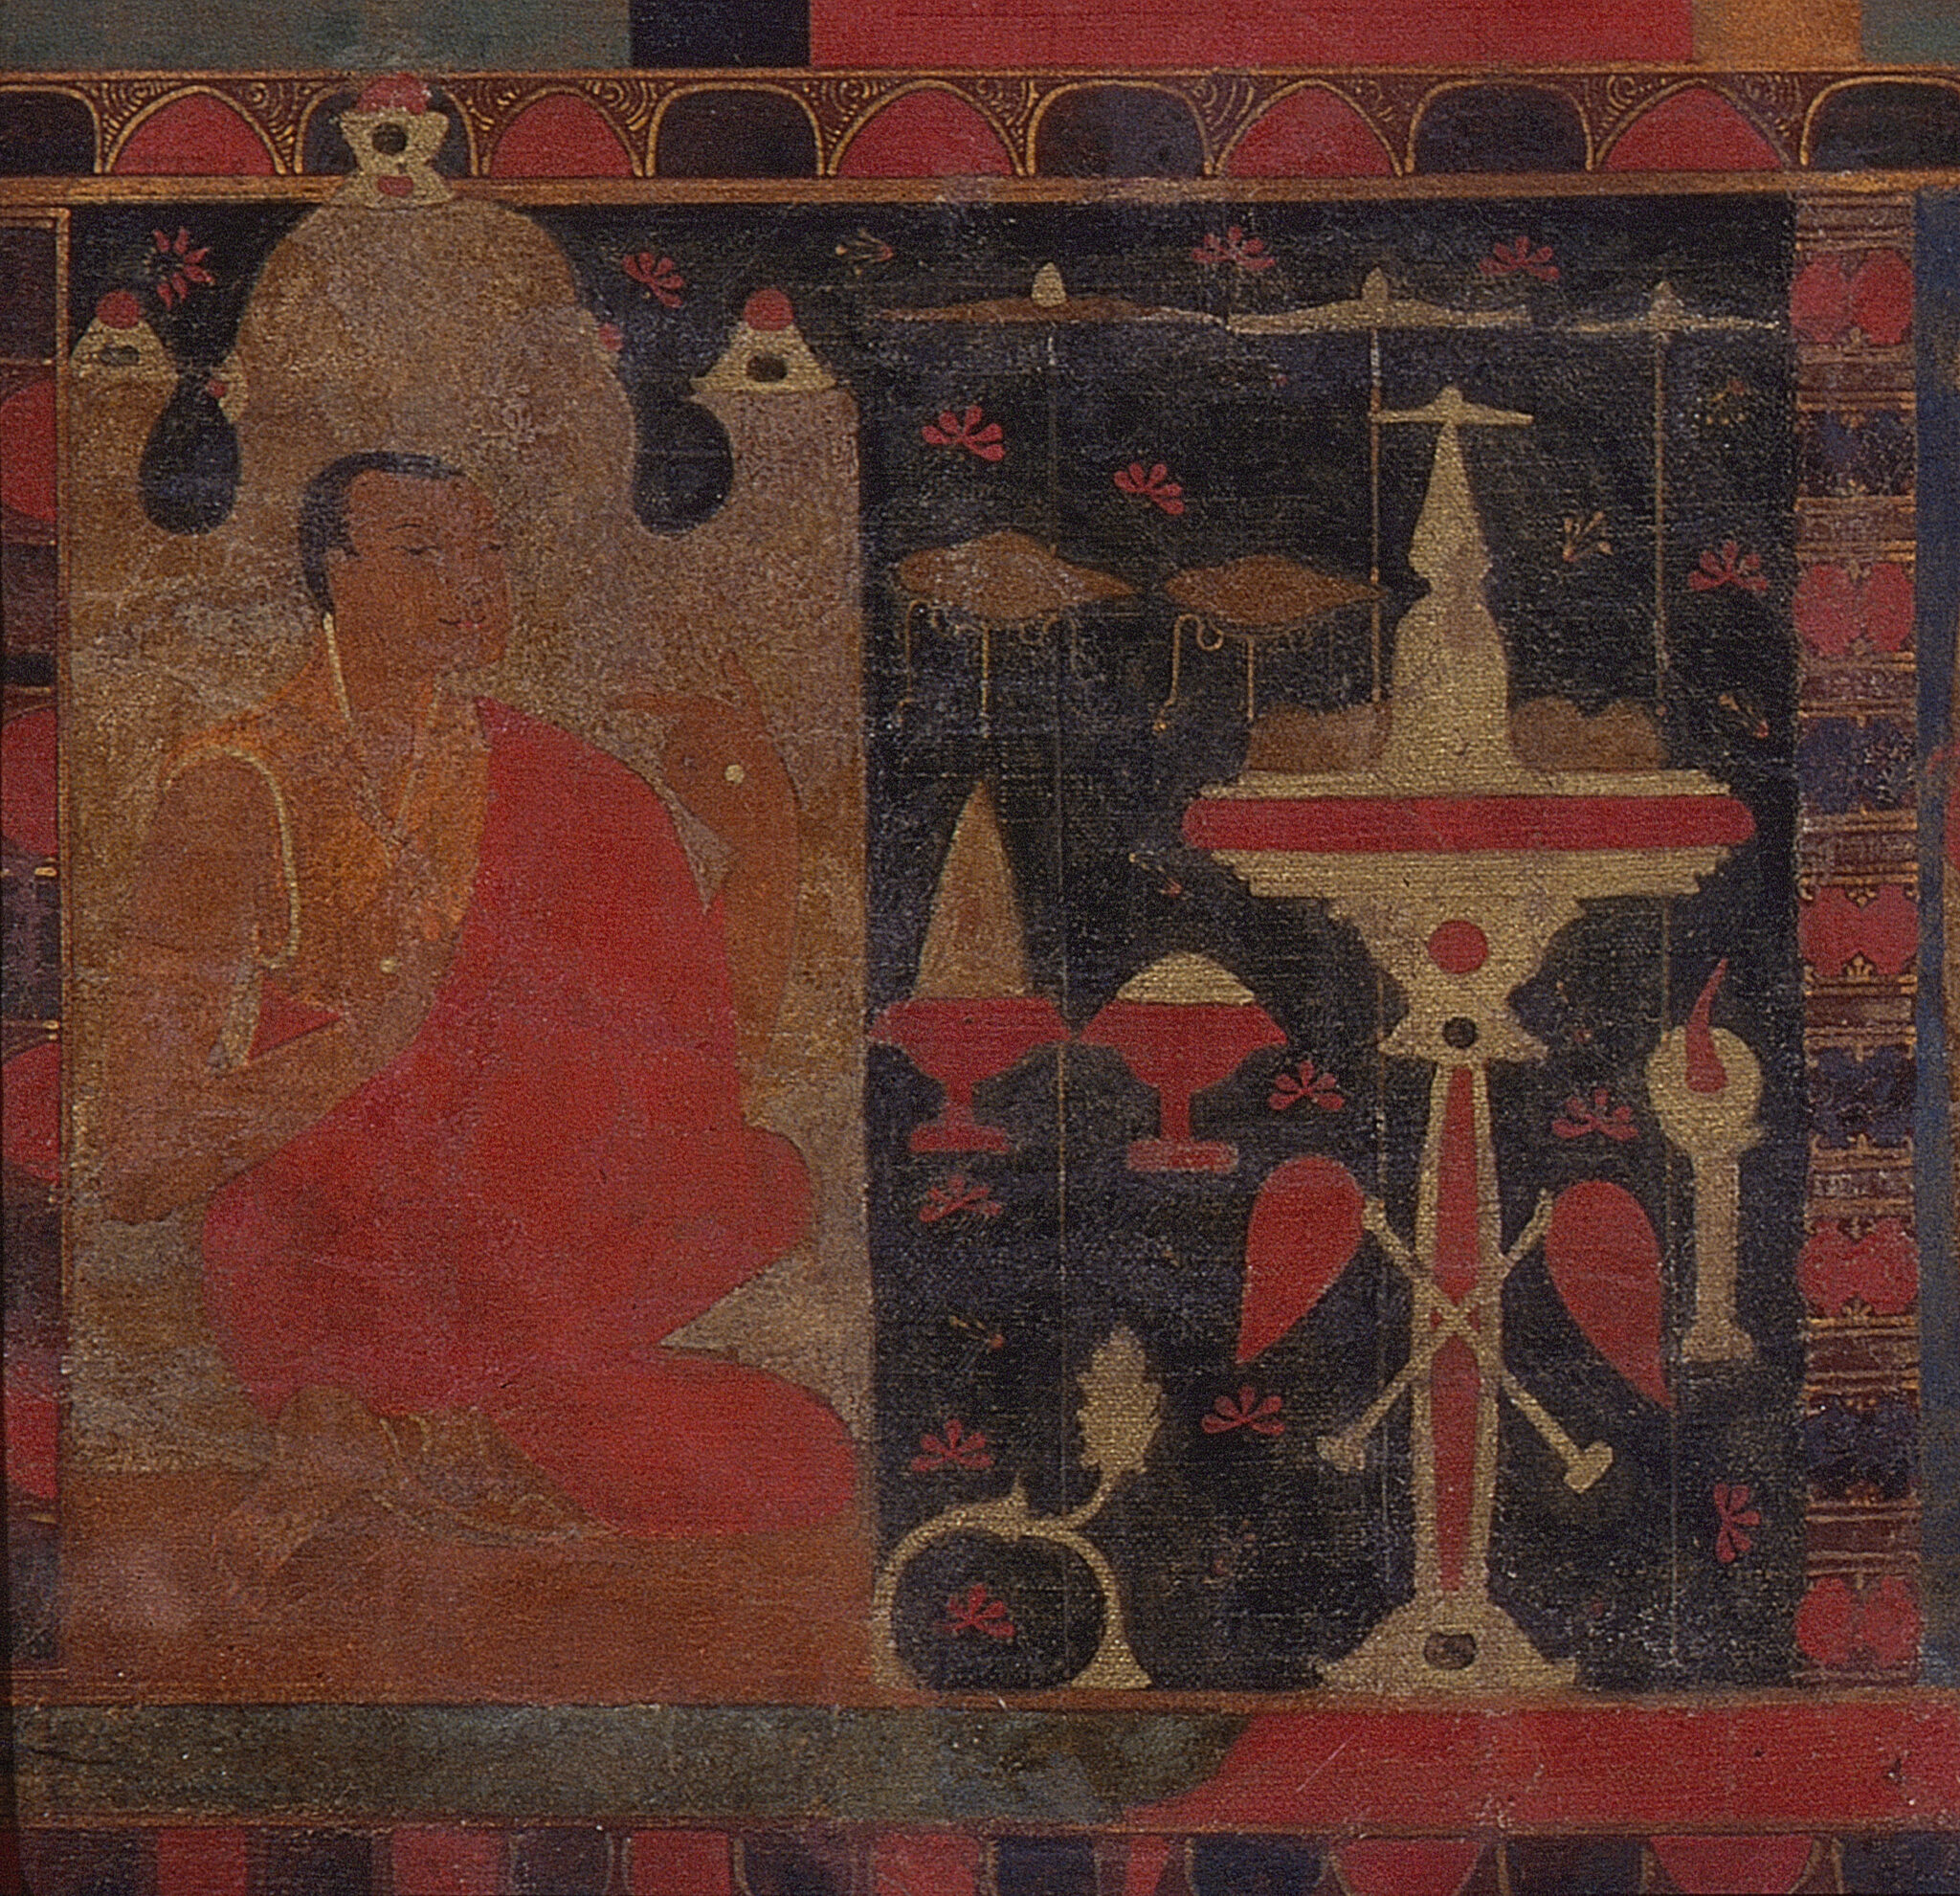 Close view of orange-robed figure seated in architectural feature on left, facing ritual objects on right